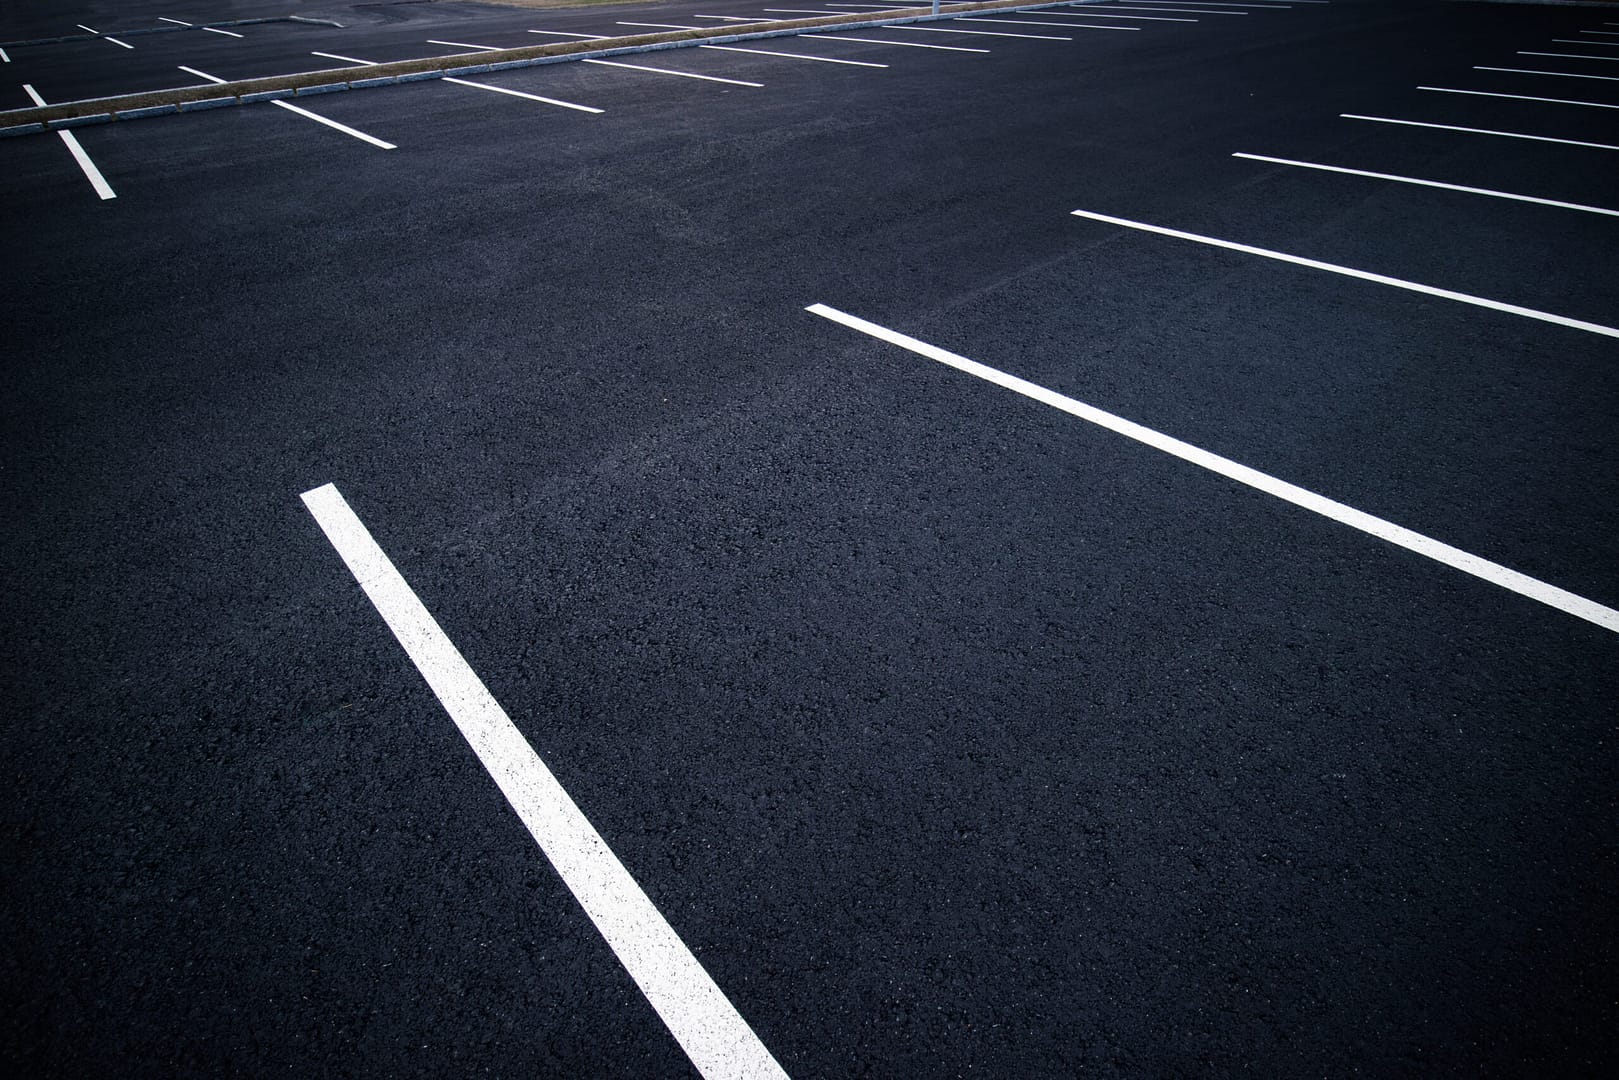 Rows of empty asphalt parking spaces in a well-lit parking lot.